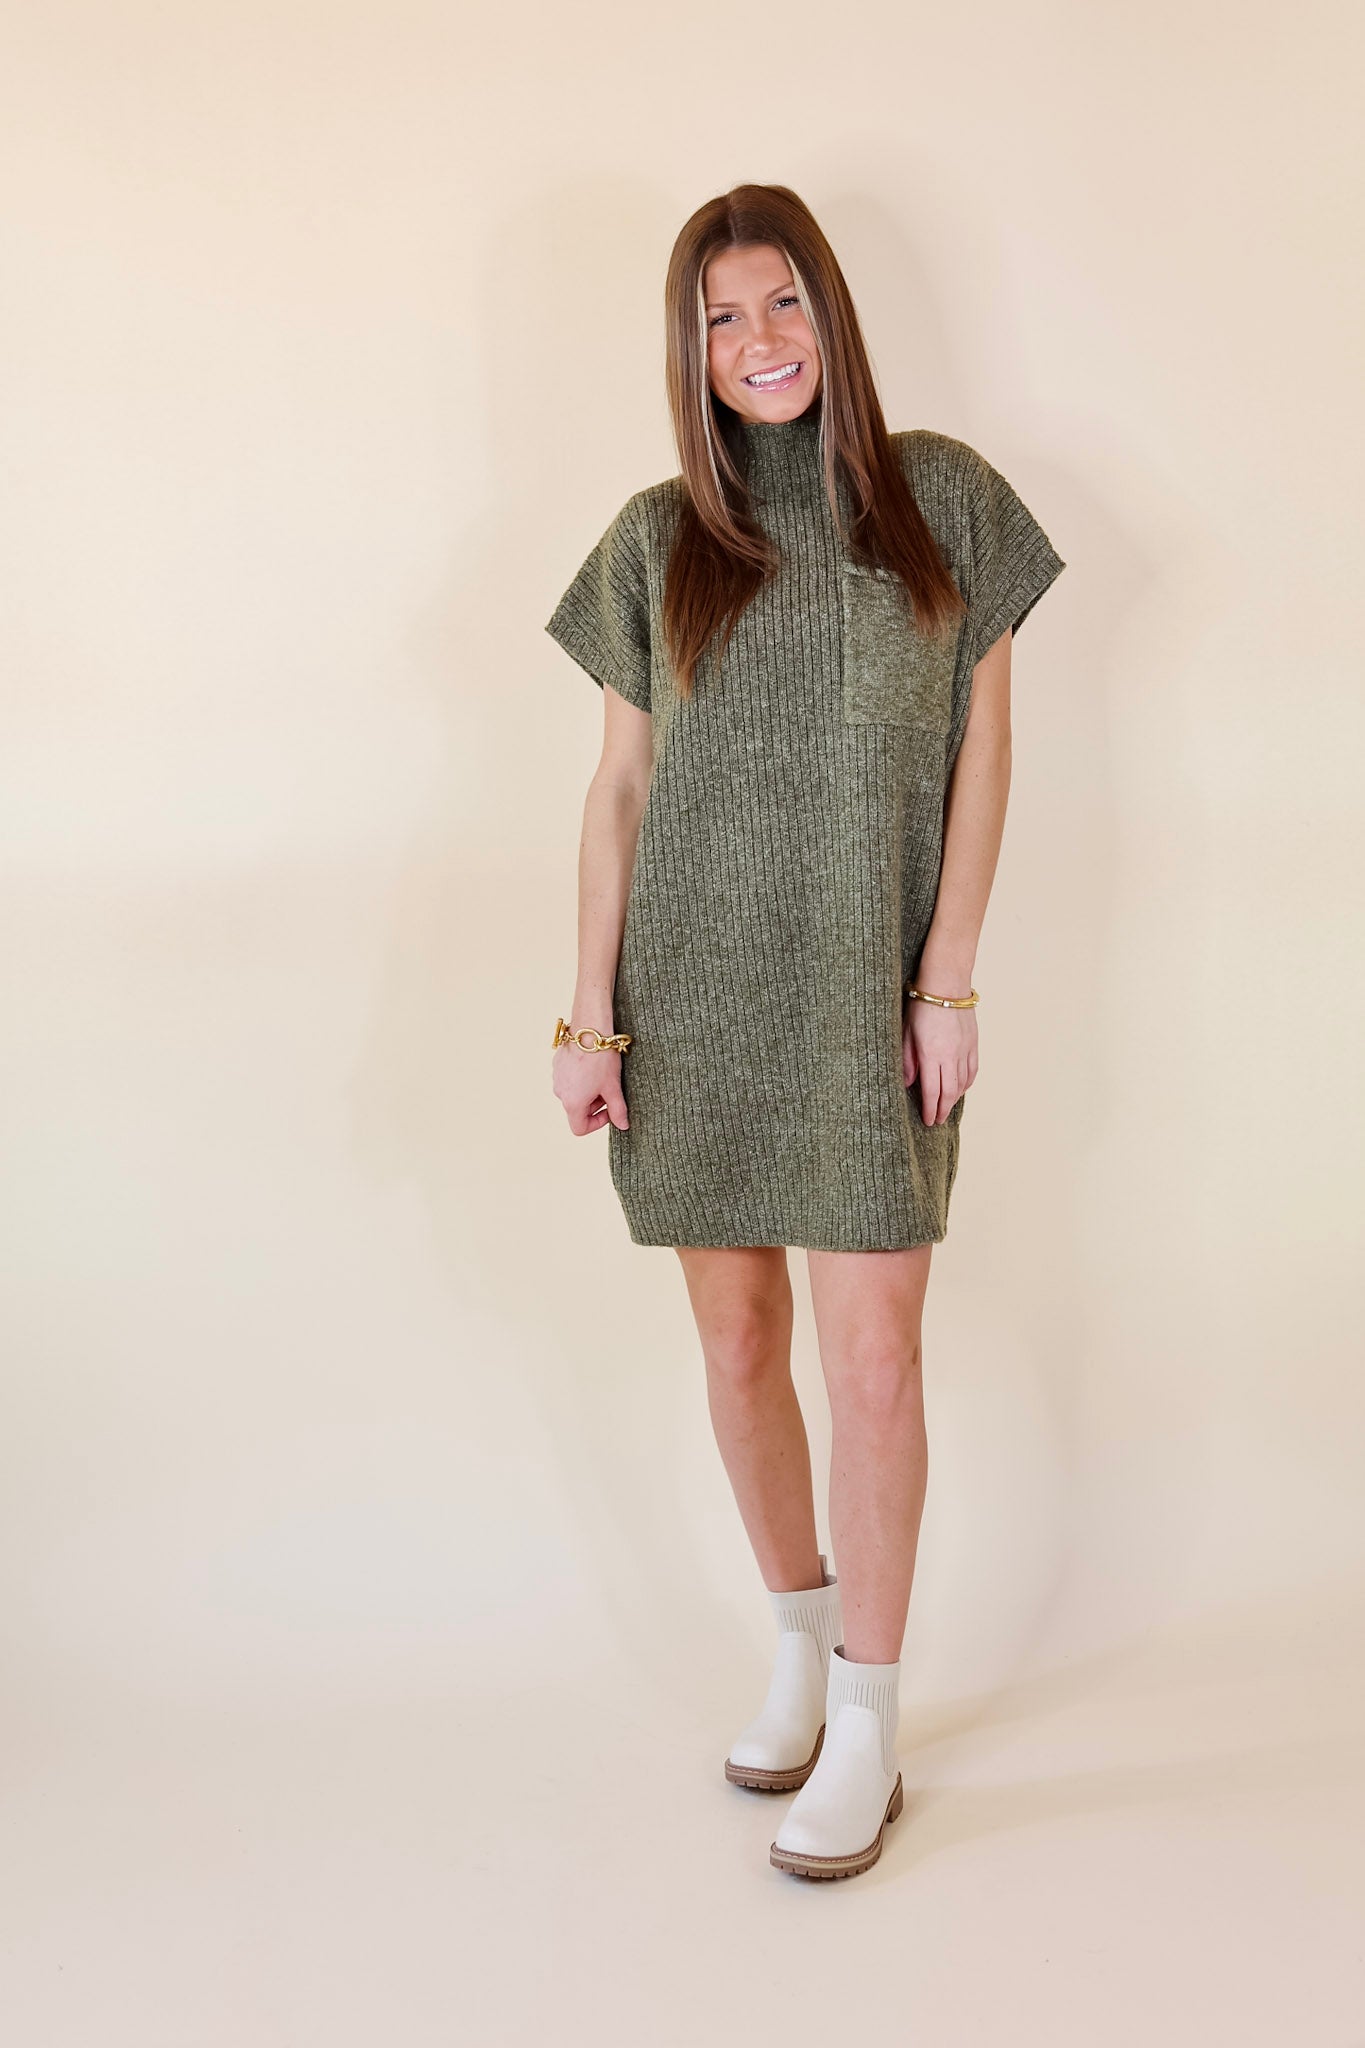 City Sights Cap Sleeve Sweater Dress in Olive Green